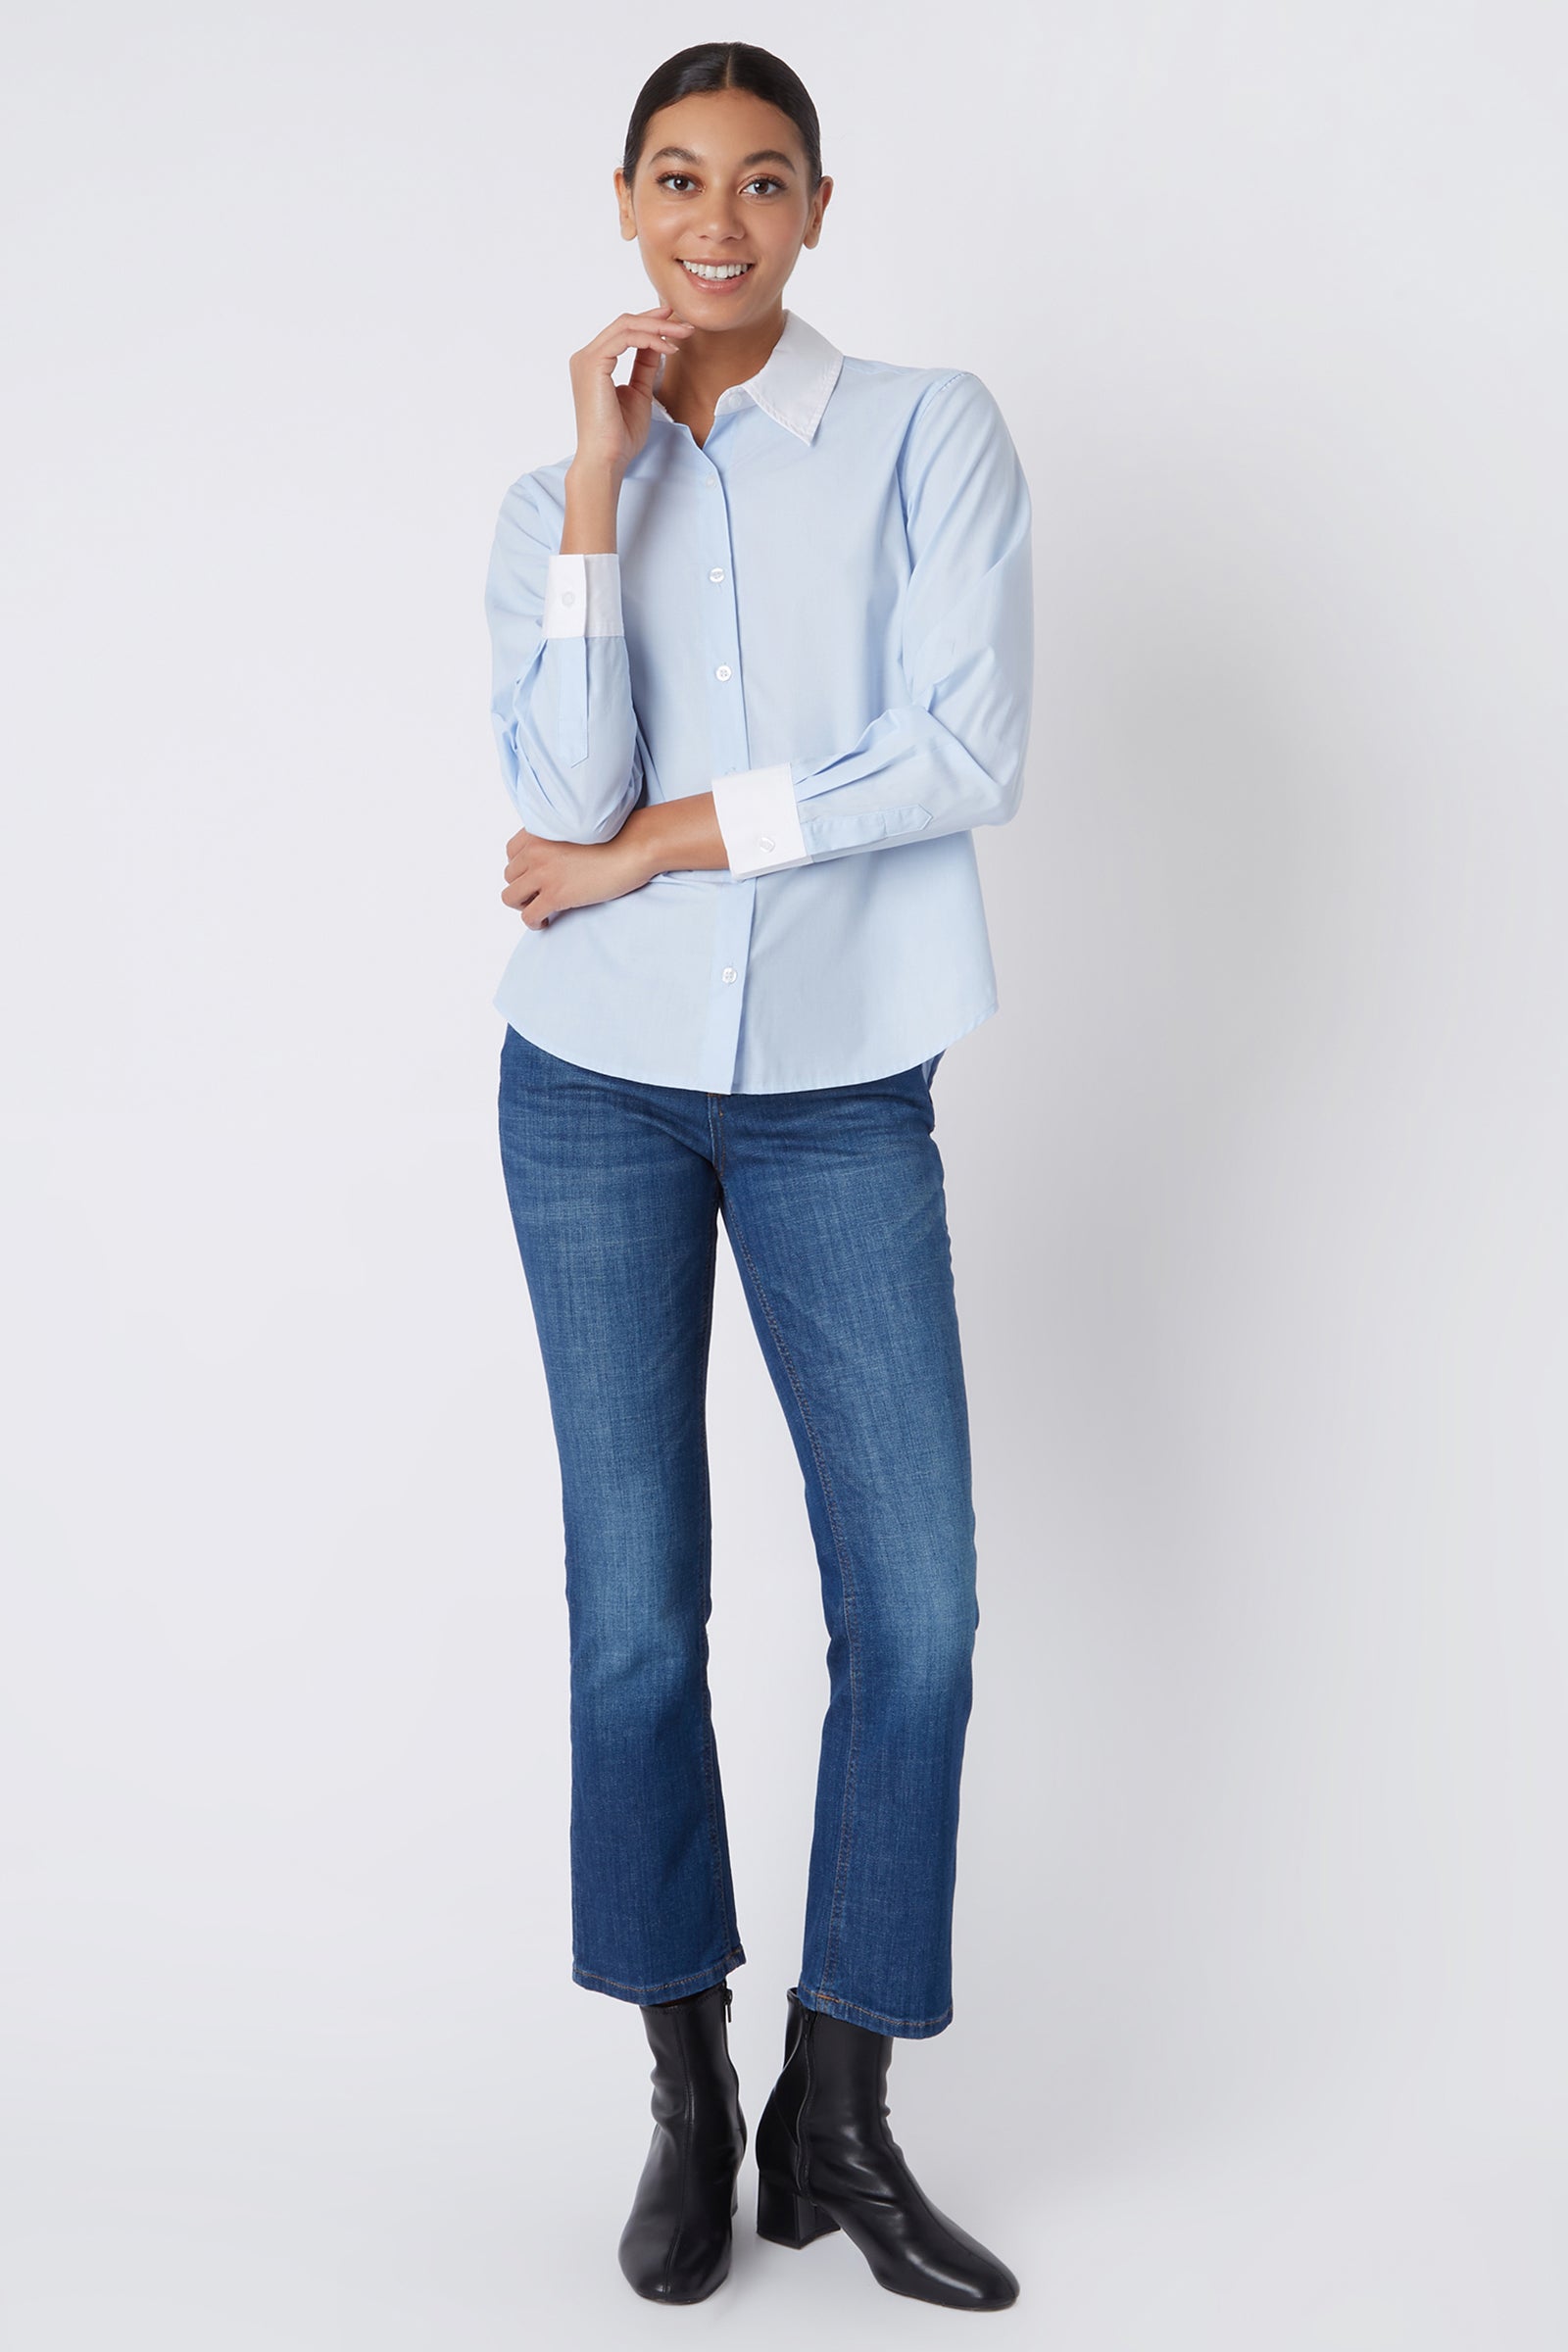 Kal Rieman Classic Tailored Shirt in Oxford Blue on Model Smiling Full Front View